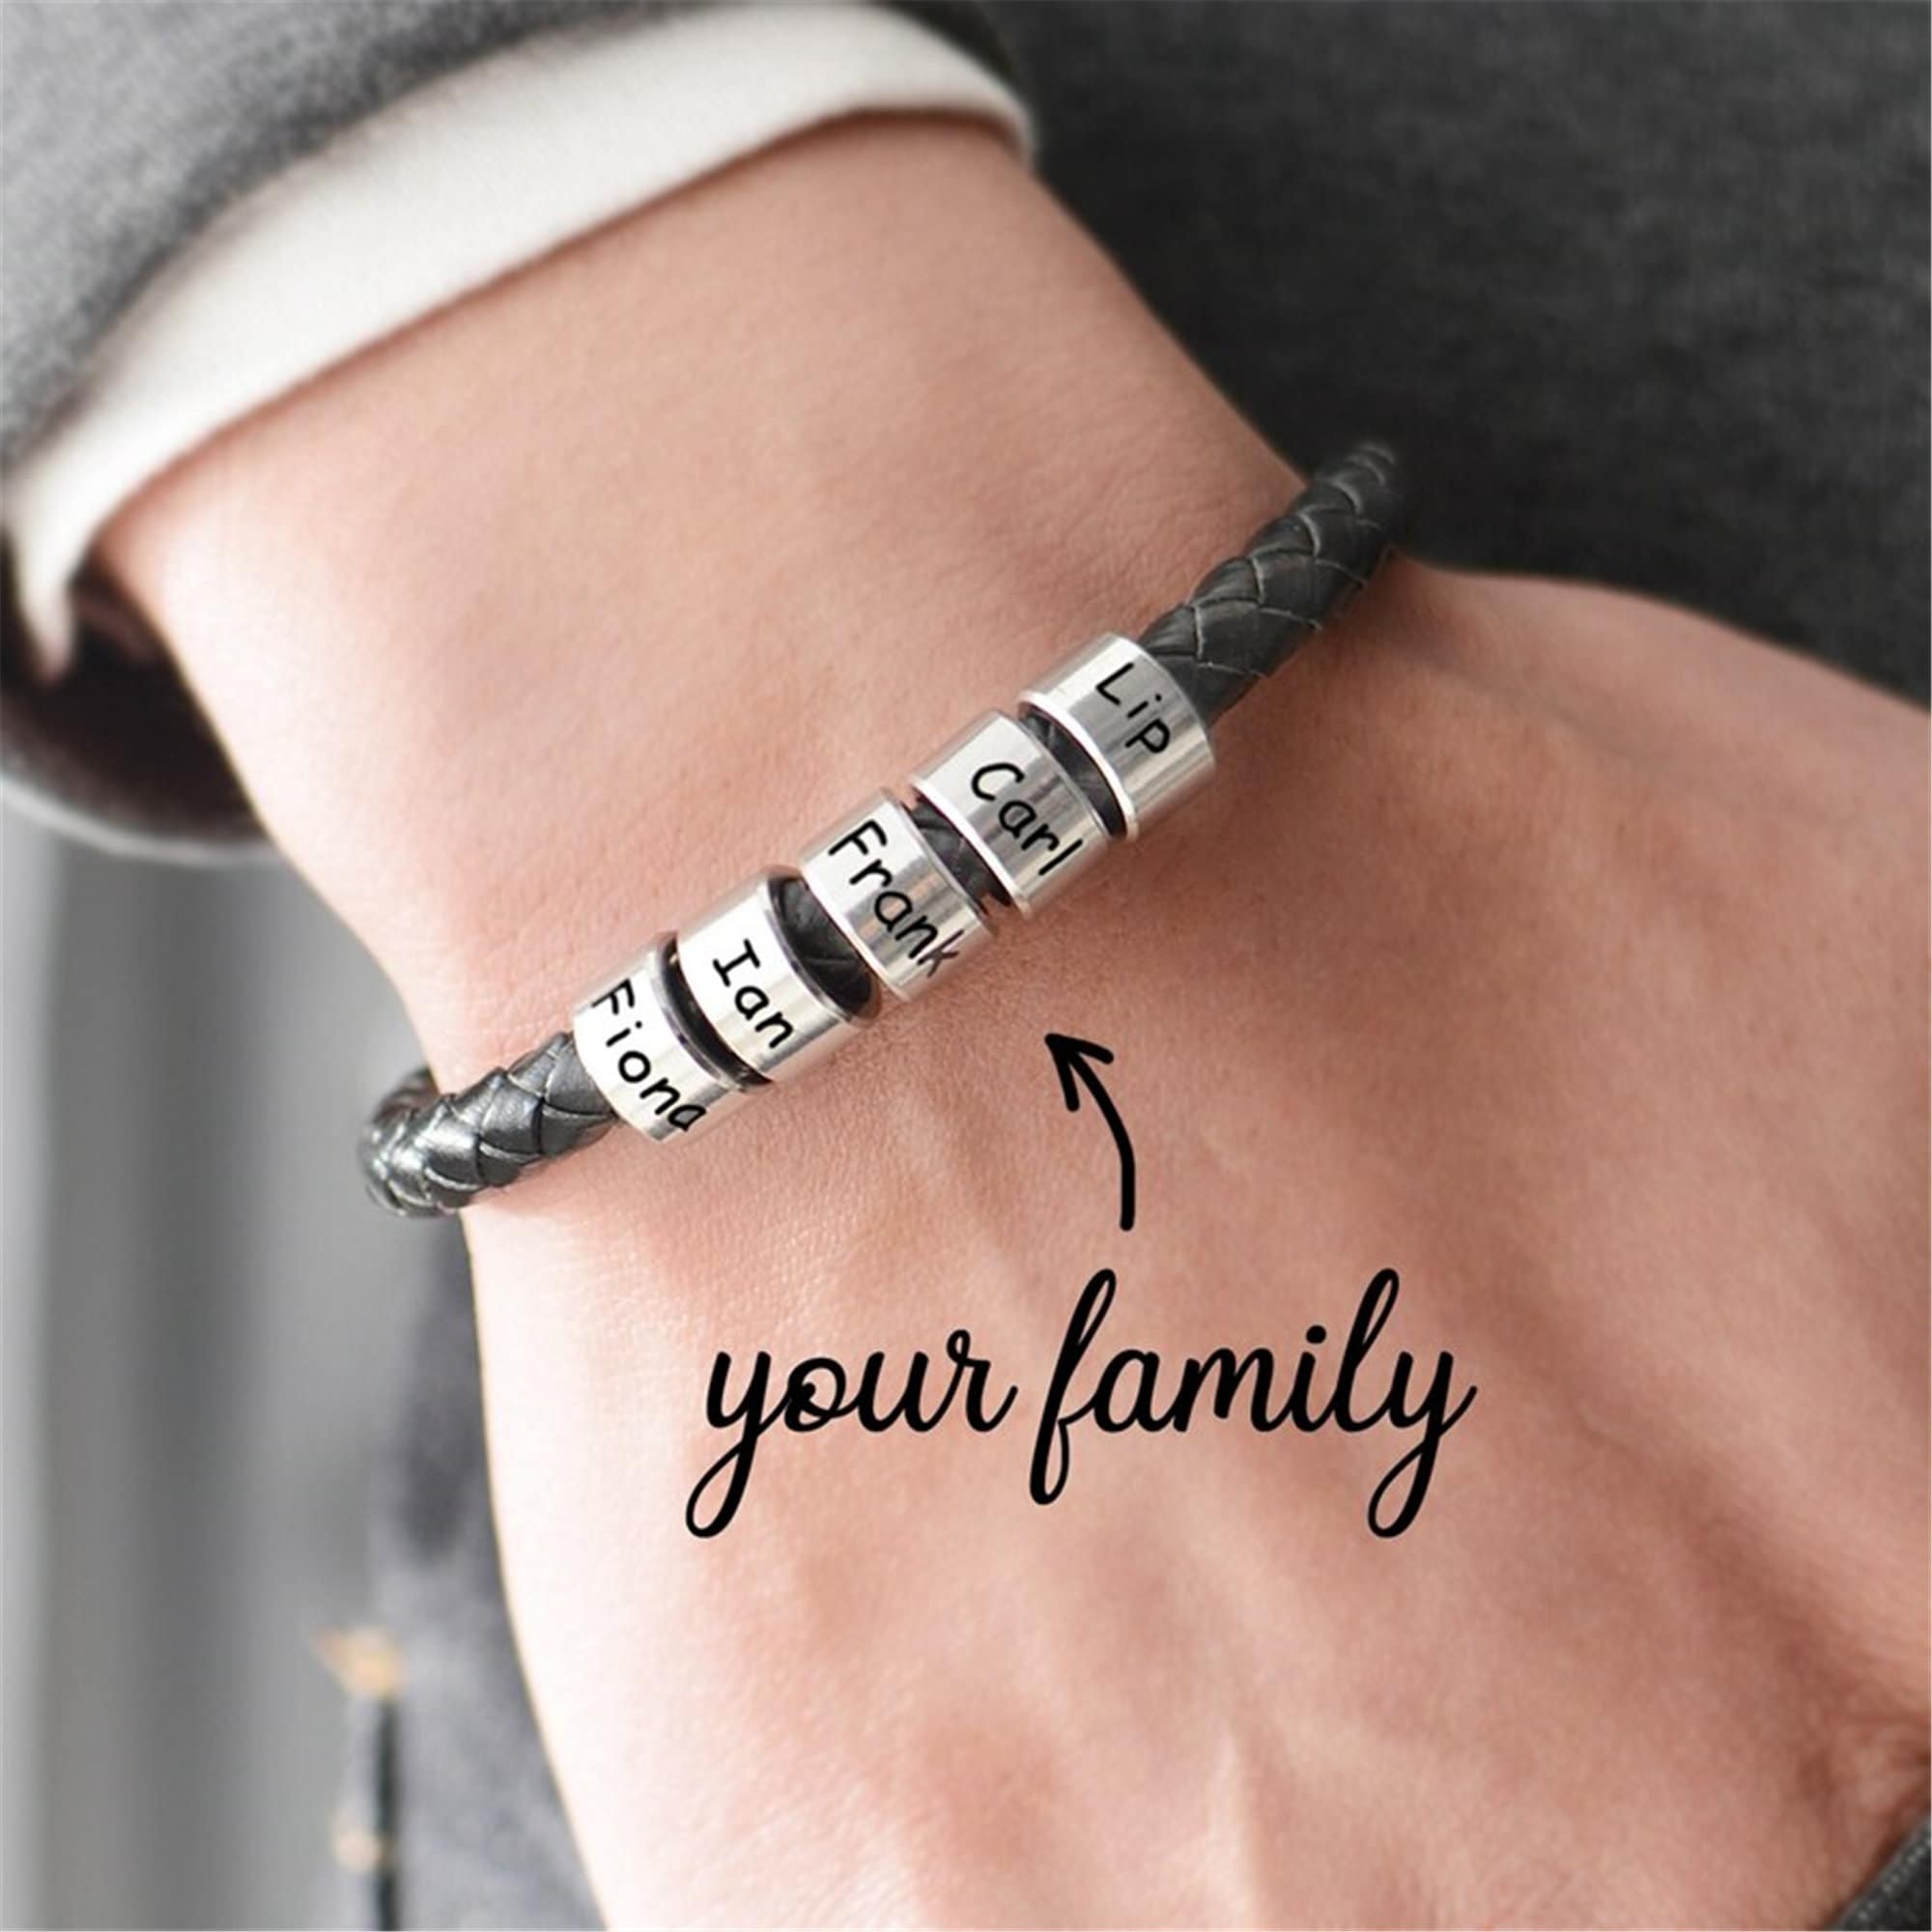 Wholesale New Accessories Stainless Steel Smooth Black Leather Braided Bracelet  Letters Personality DIY Bracelets for Men From m.